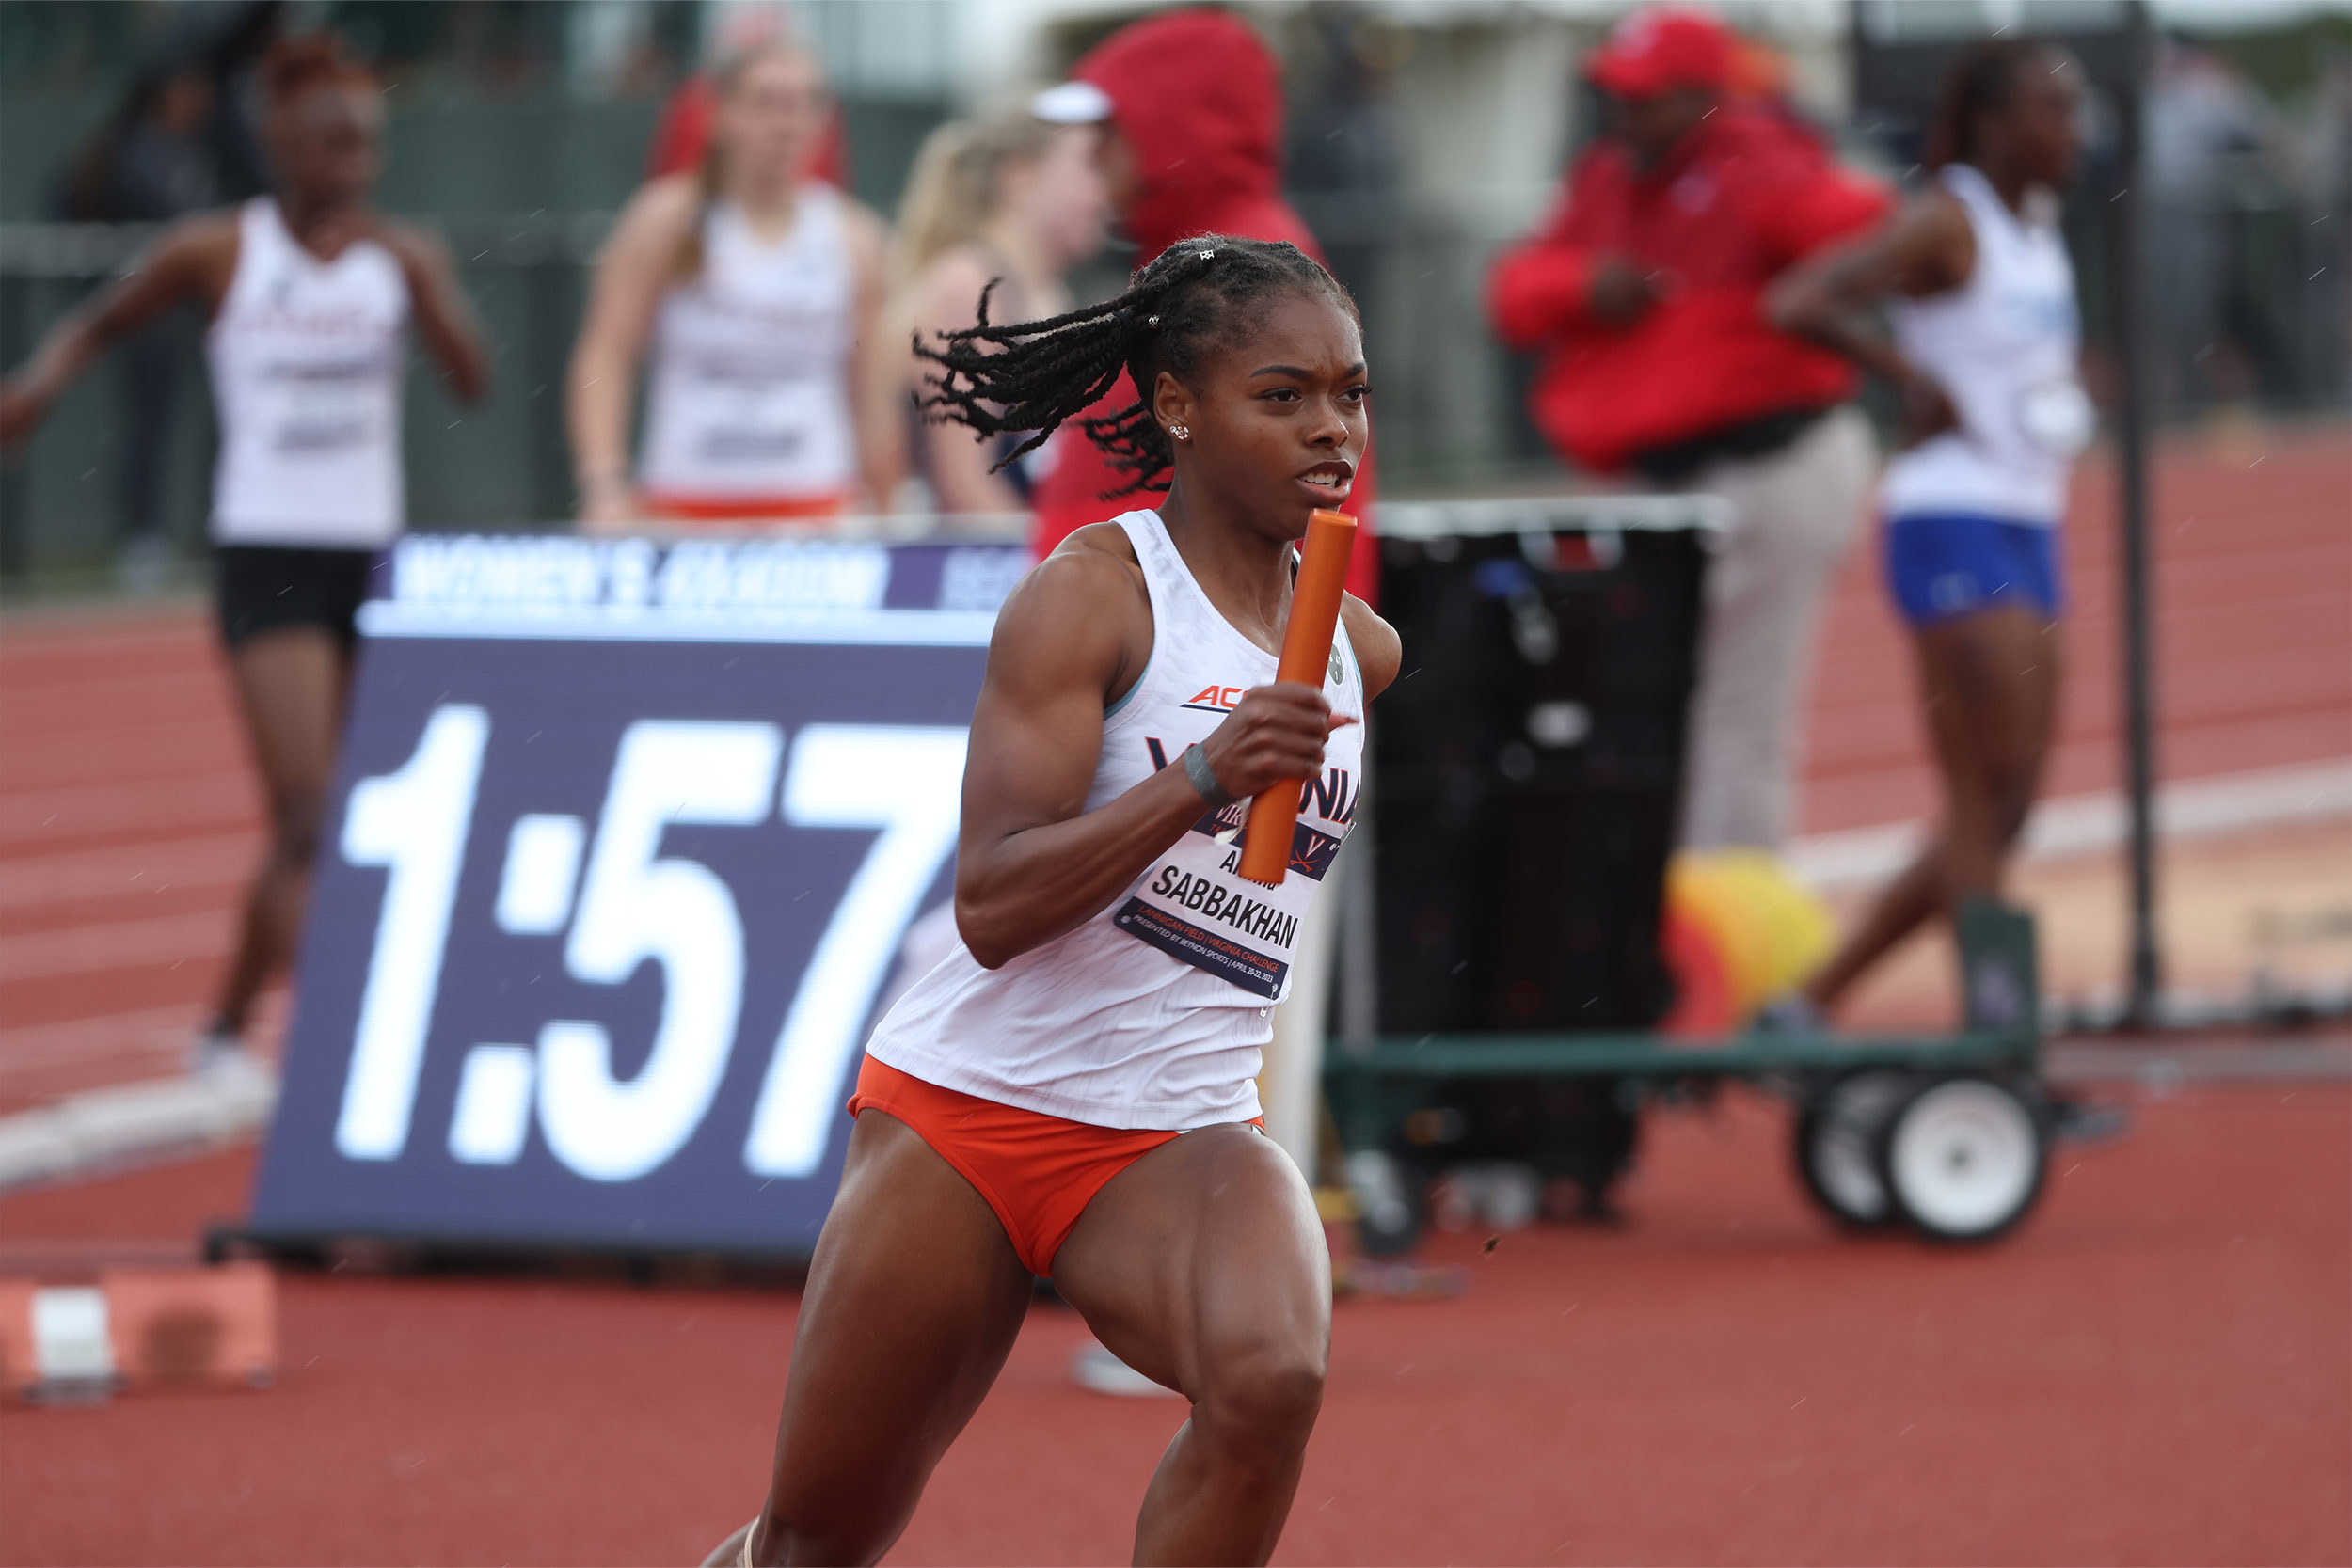 He Challenged This Female UVA Track Star to a Race. It Didn't Go